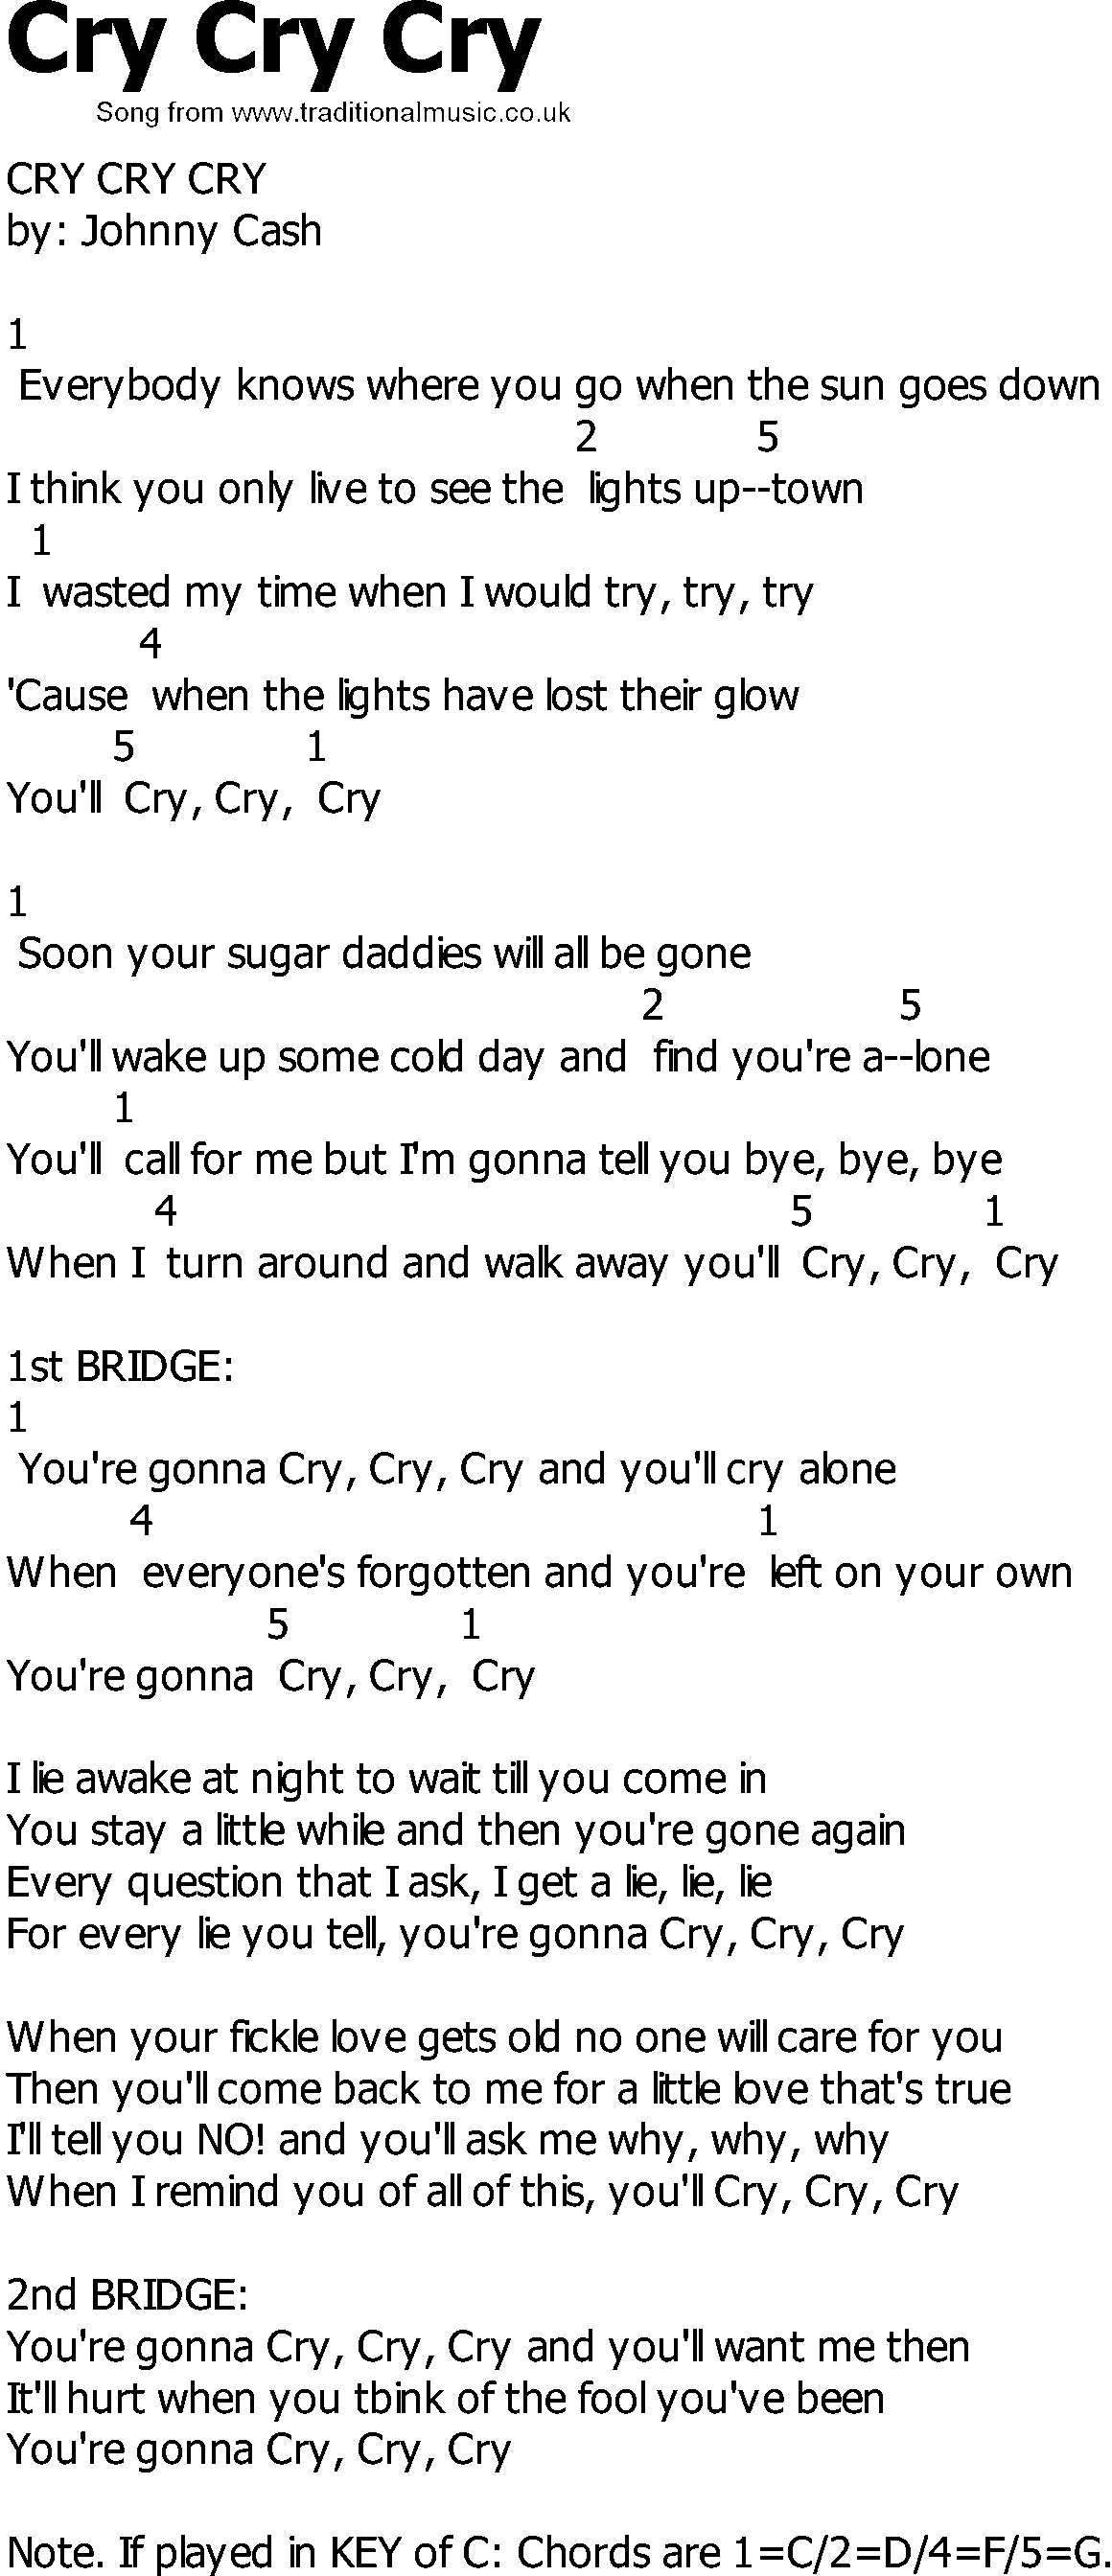 Old Country song lyrics with chords - Cry Cry Cry